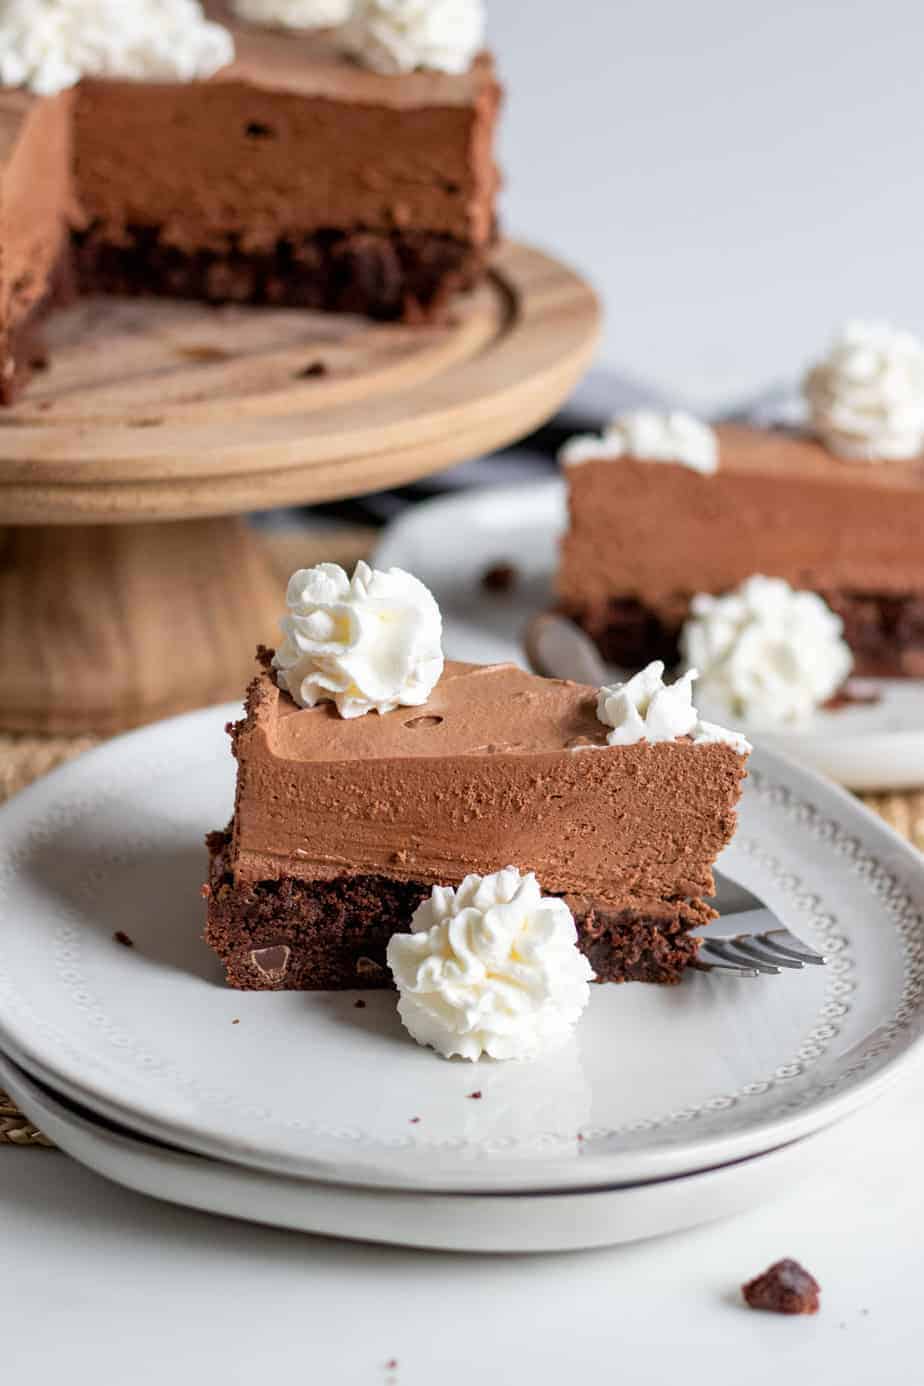 Frozen Chocolate Mousse Cake - Make Ahead! - That Skinny Chick Can Bake-mncb.edu.vn